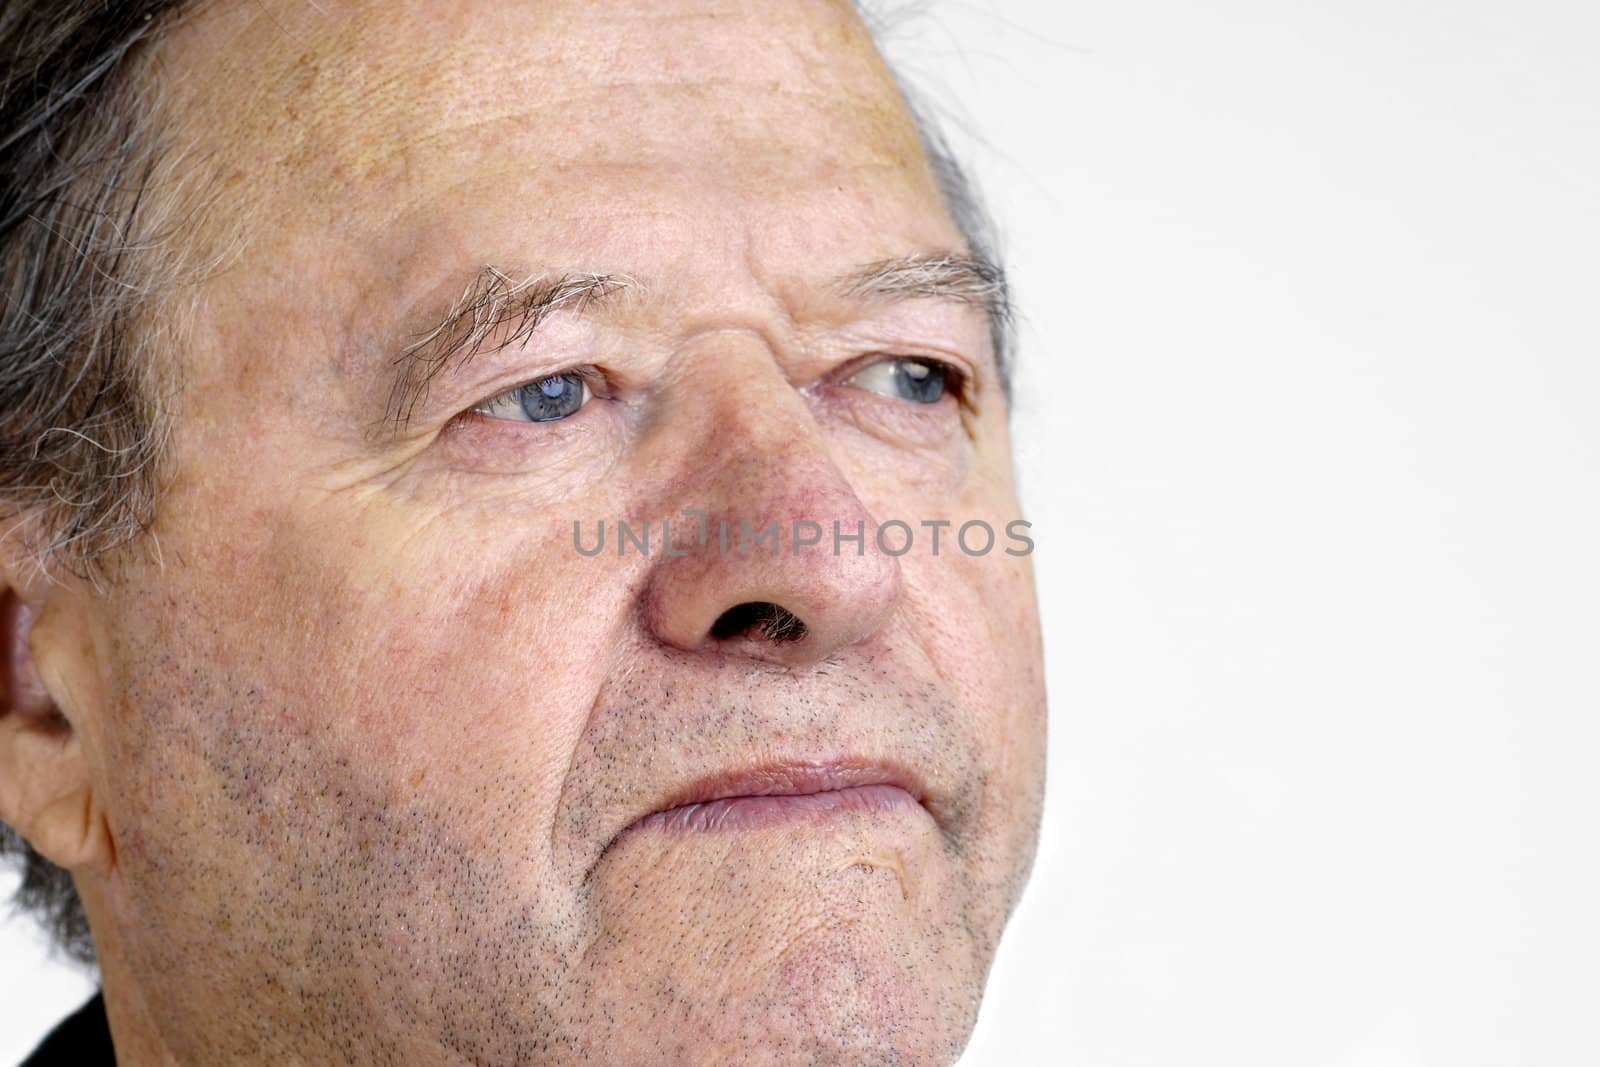 Portrait of a senior man with blue eyes looking away with hint of a smile, great facial details, over white.